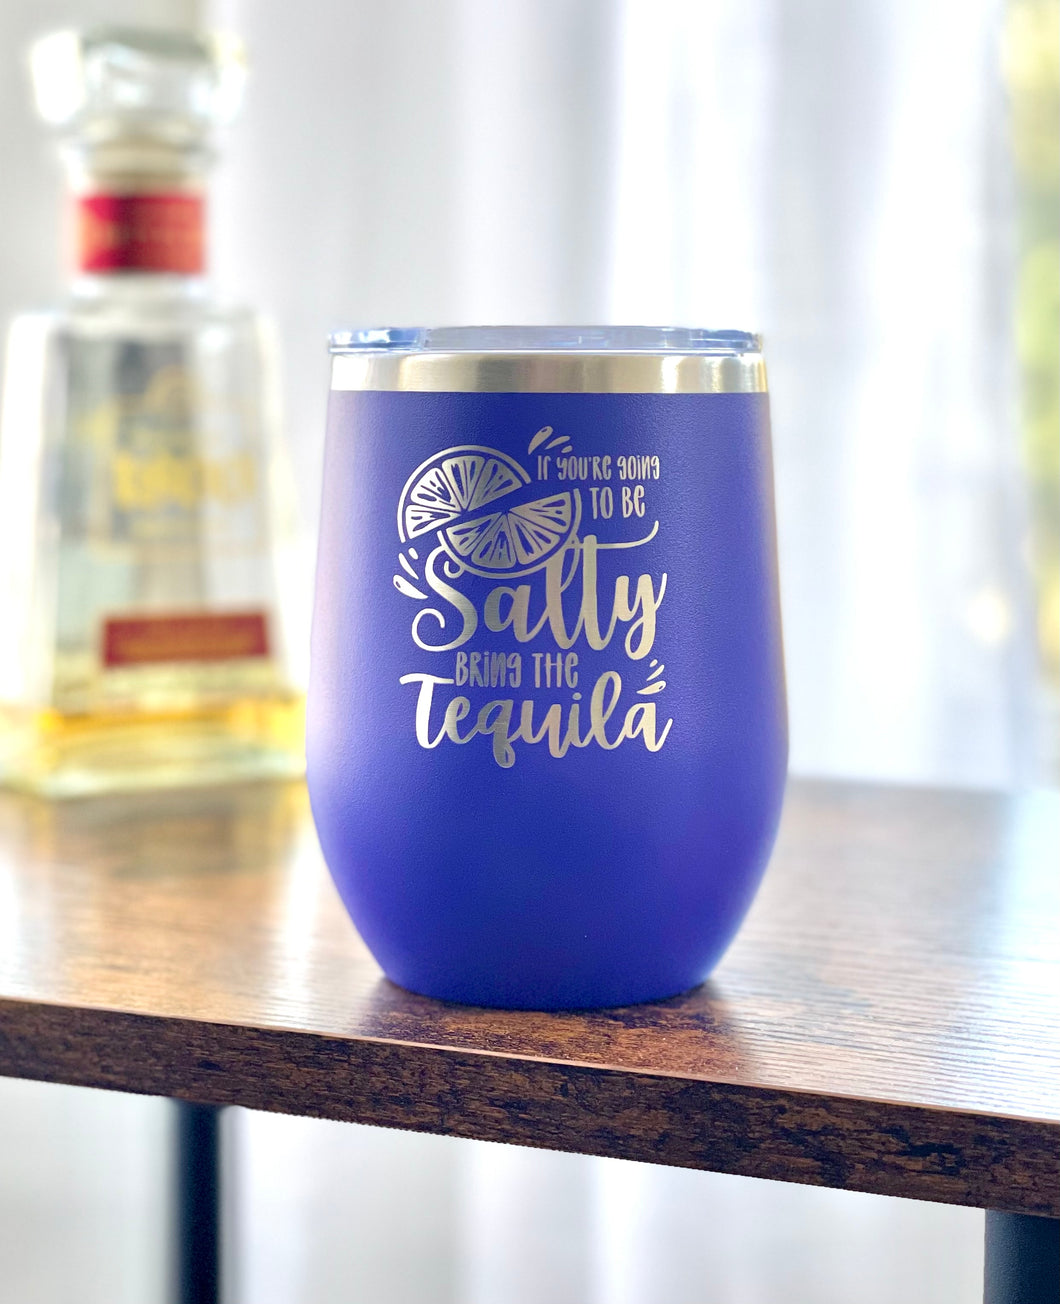 If You're Going To Be Salty, Bring The Tequila